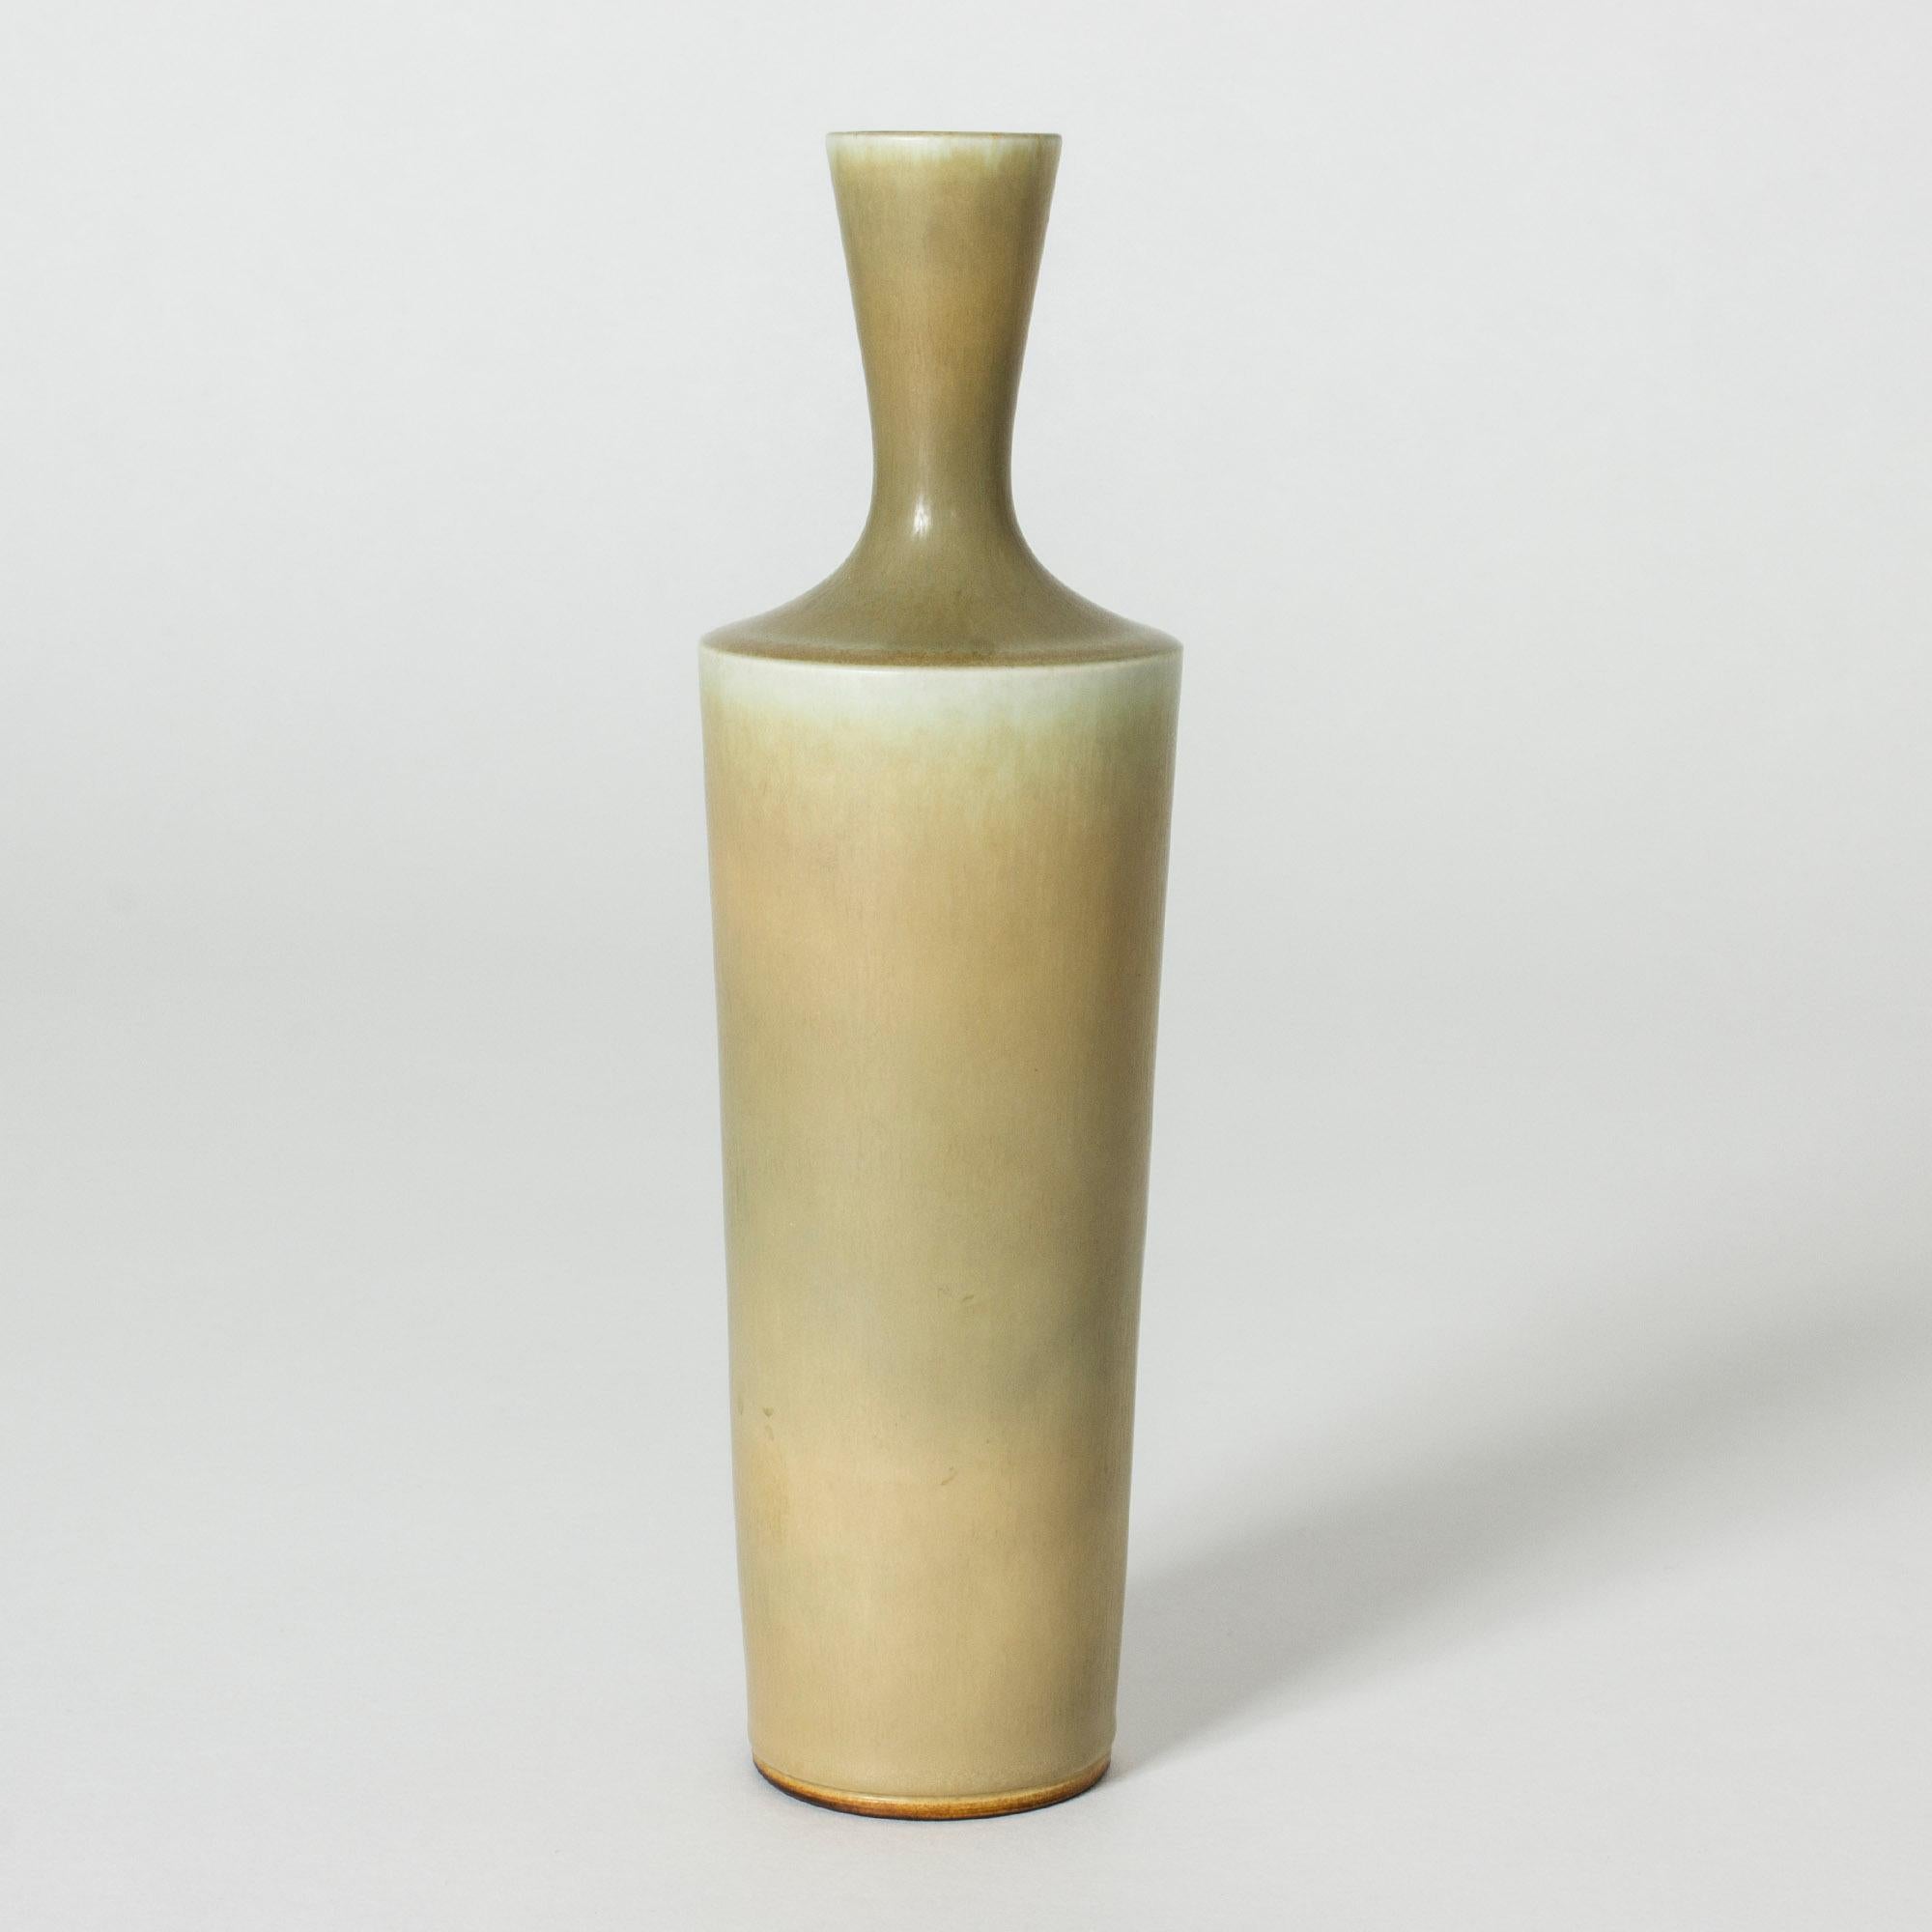 Stoneware vase by Berndt Friberg, in a stately shape with a sharp finish to the body where it transitions to the nozzle. Pale yellow hare’s fur glaze.